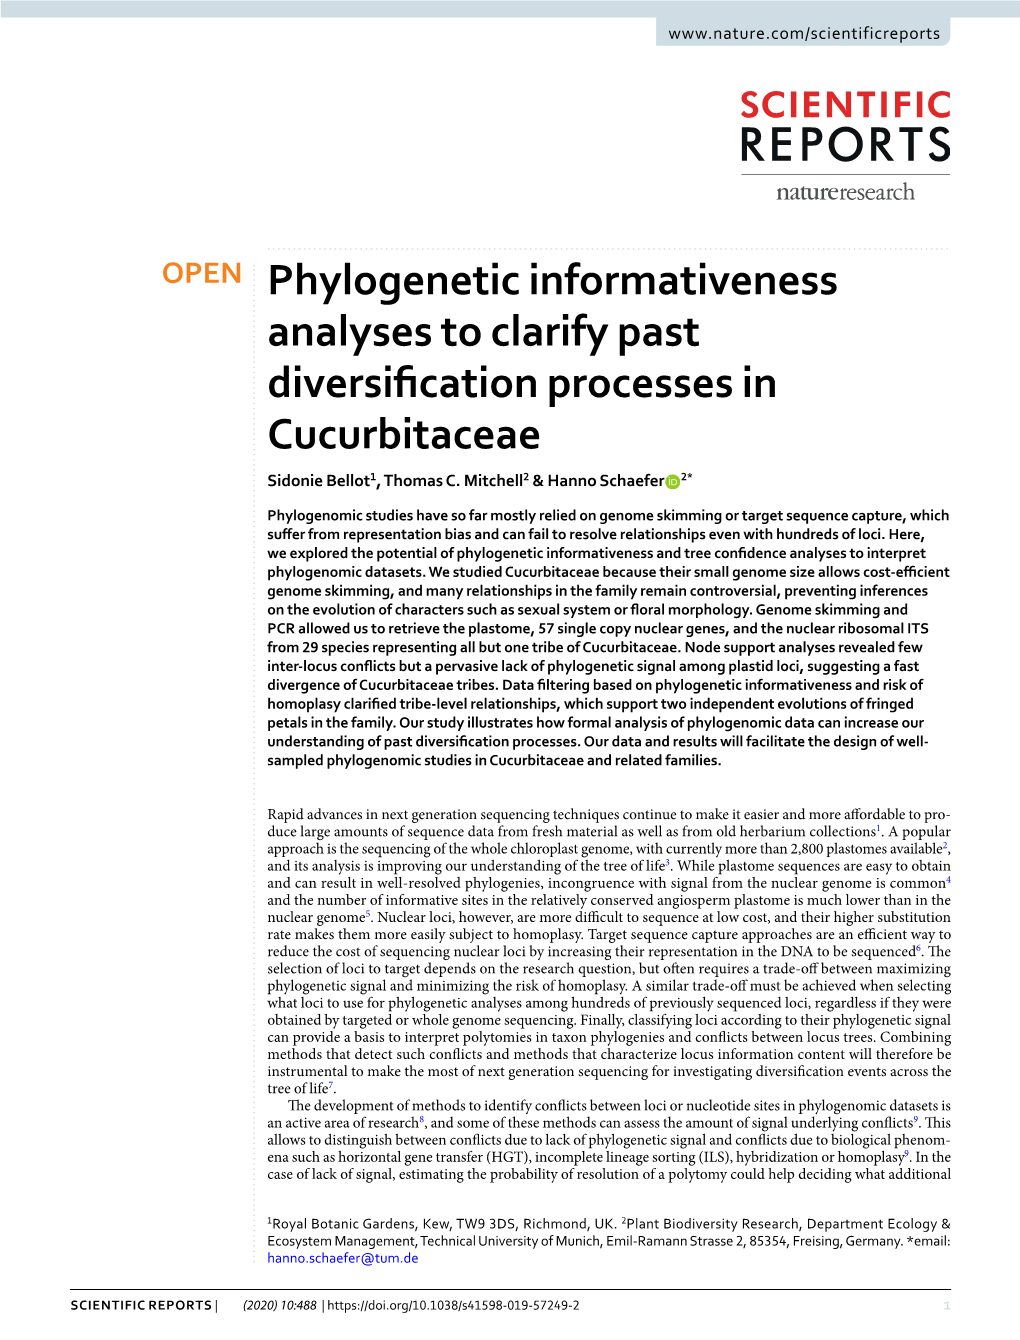 Phylogenetic Informativeness Analyses to Clarify Past Diversifcation Processes in Cucurbitaceae Sidonie Bellot1, Thomas C